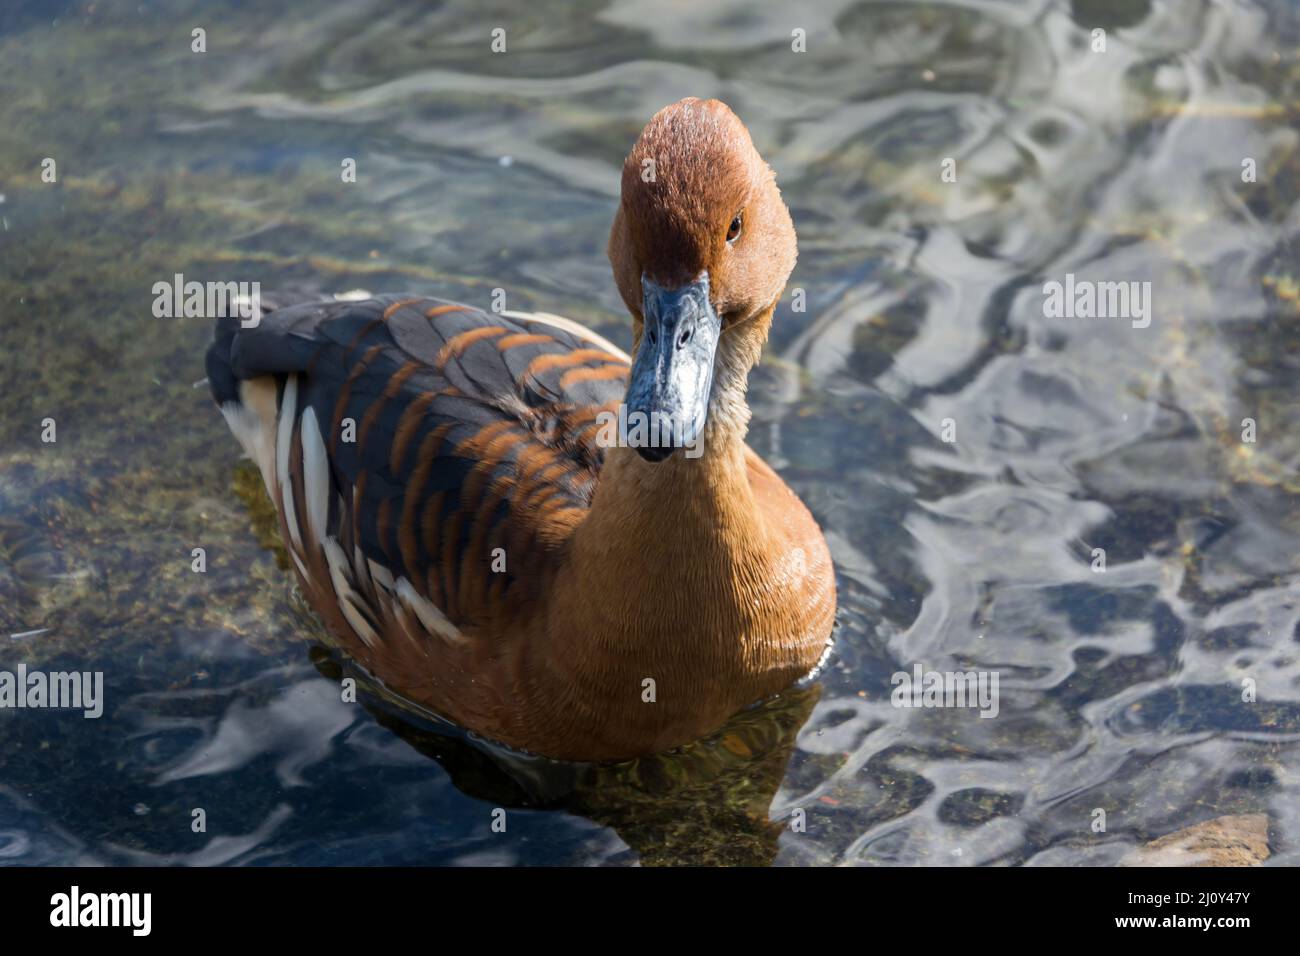 Fulvous Whistling Duck (Dendrocygna bicolor) by the edge of the lake Stock Photo